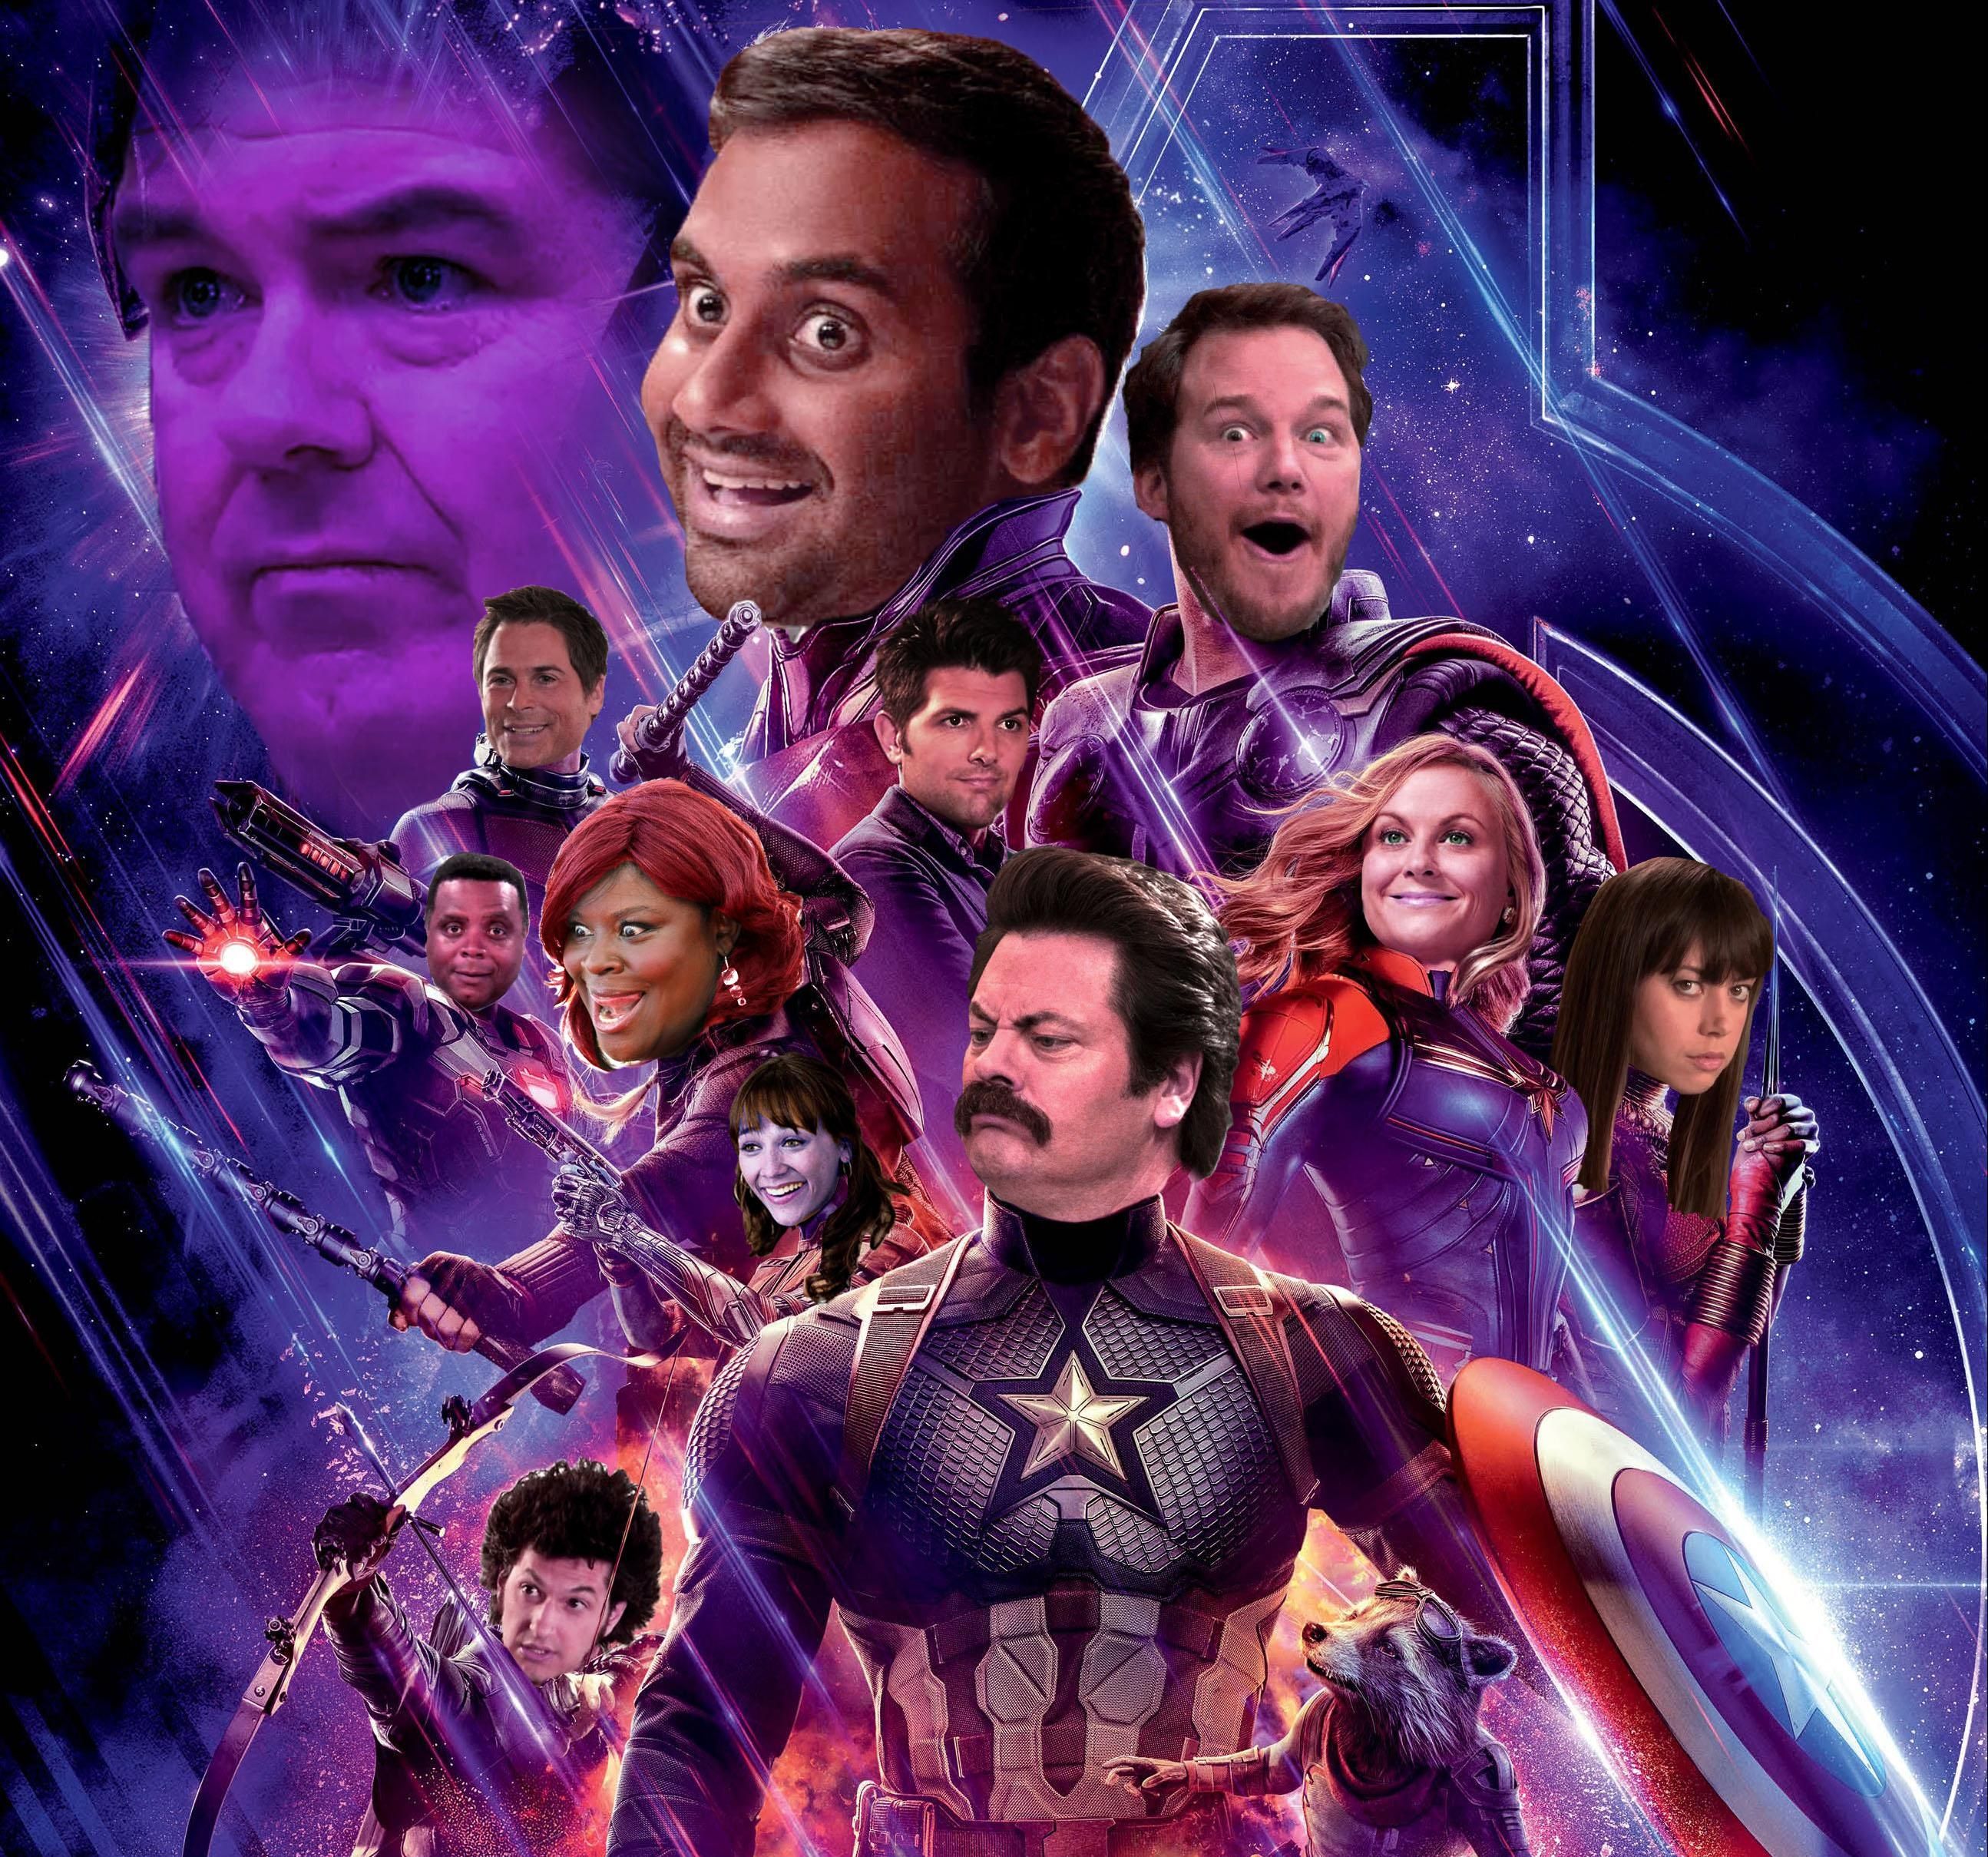 Avengers, but with the cast of Parks and Recreation